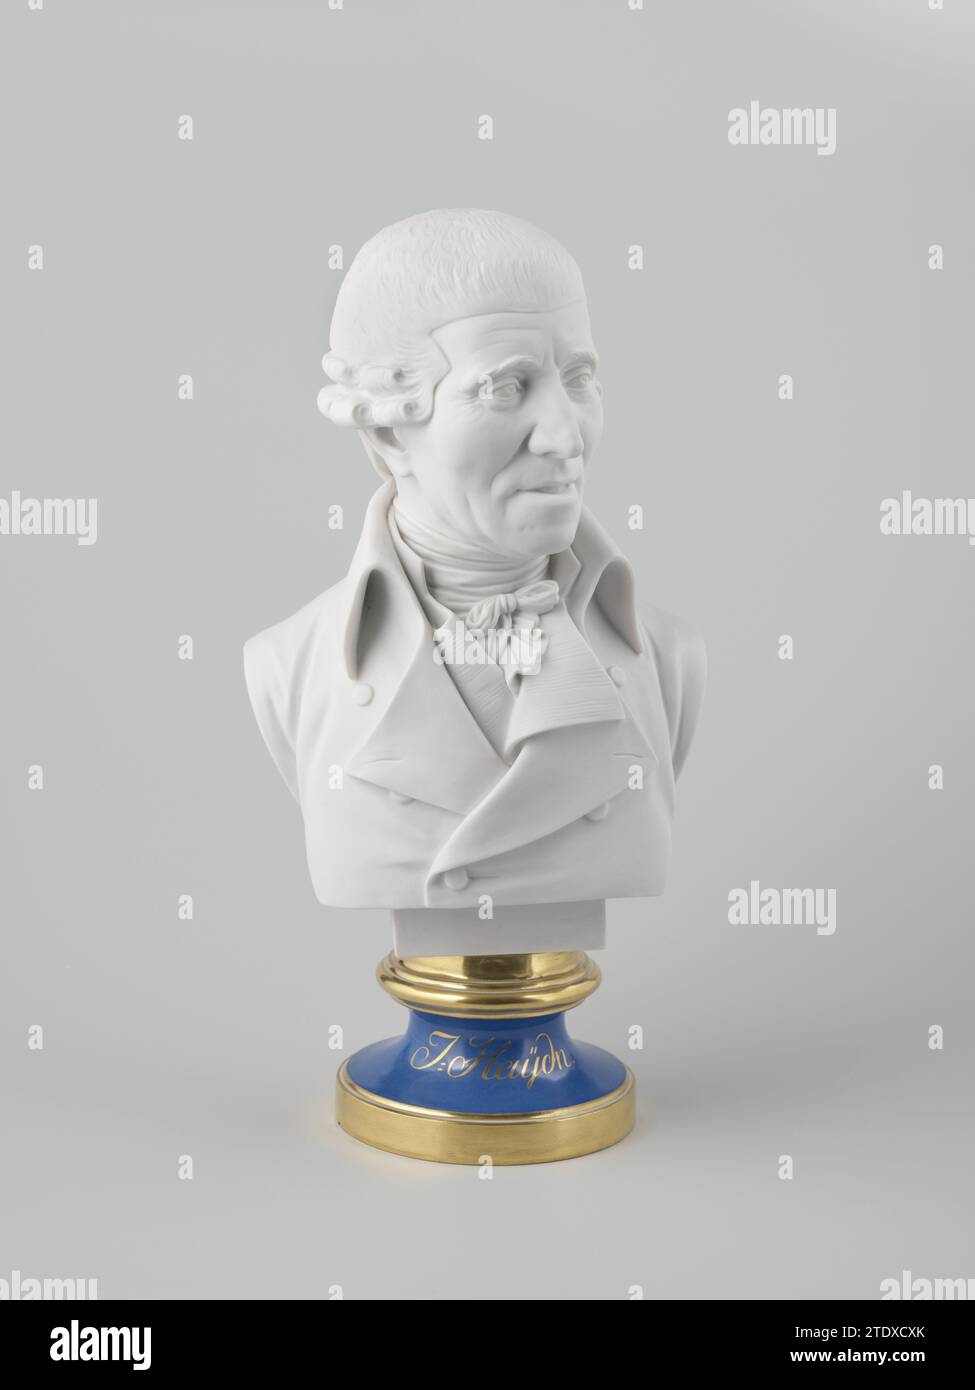 Portrait of Joseph Haydn, Imperial Porcelain Manufaktur, 1805 Bust of porcelain on a round pedestal. The portrait representing Joseph Haydn (1732-1809) is in biscuit and the pedestal is covered with blue and gold on the glaze. Marked on the underside with the shield, number 59 and year number 805. Vienna porcelain. glaze. gold (metal) painting / gilding / vitrification Bust of porcelain on a round pedestal. The portrait representing Joseph Haydn (1732-1809) is in biscuit and the pedestal is covered with blue and gold on the glaze. Marked on the underside with the shield, number 59 and year num Stock Photo